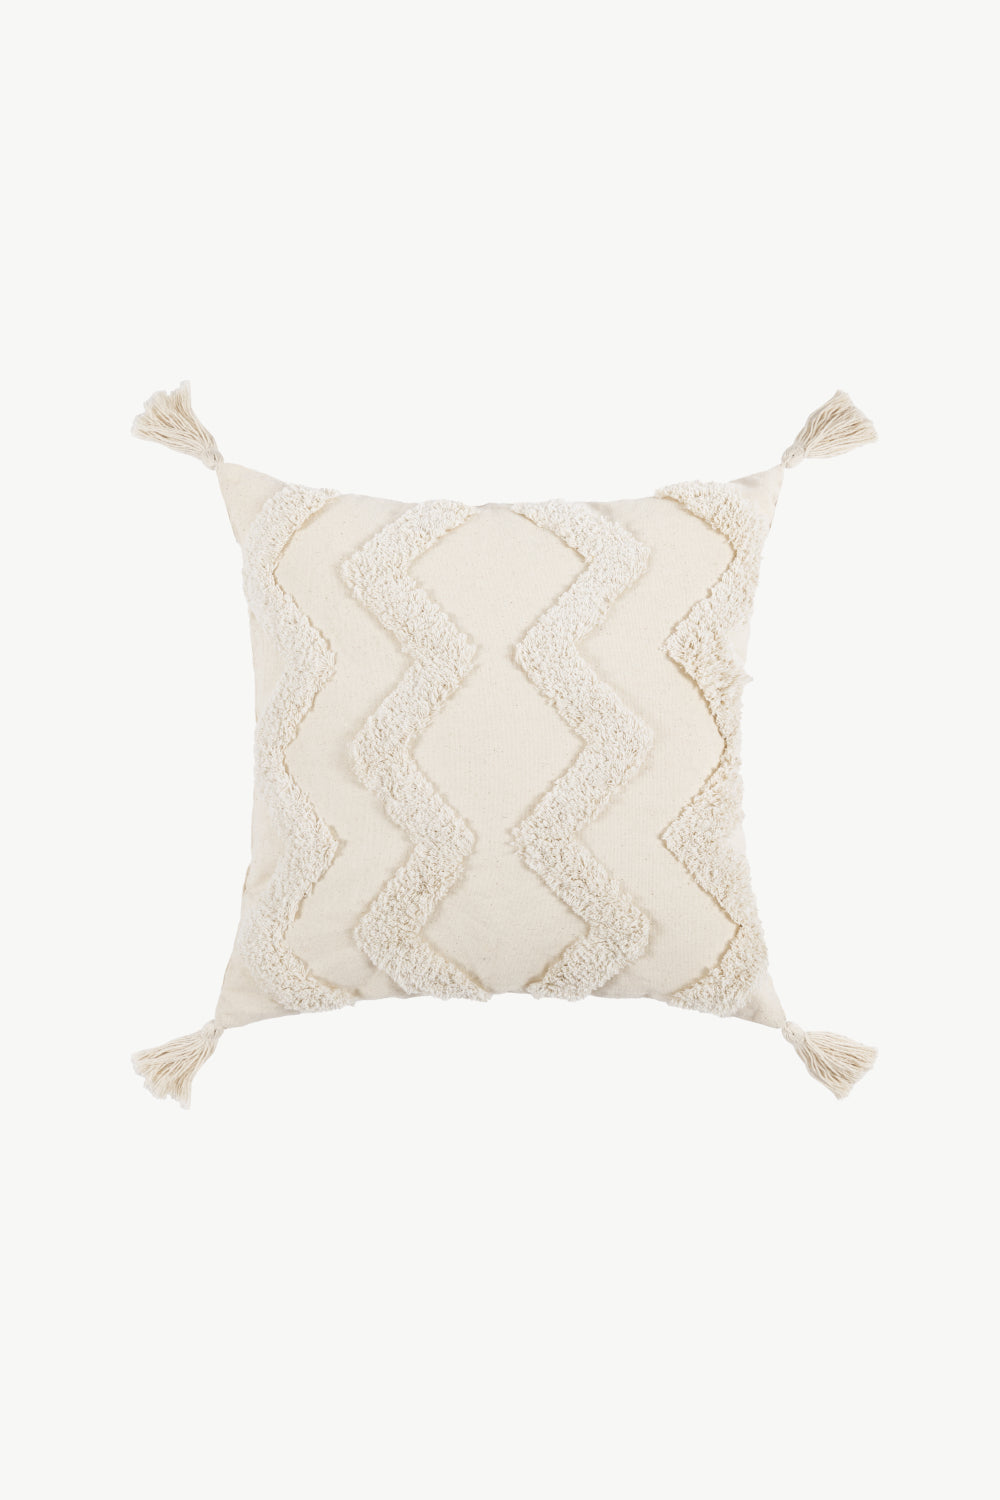 Fringe Decorative Throw Pillow Case-SHIPS DIRECTLY TO YOU!